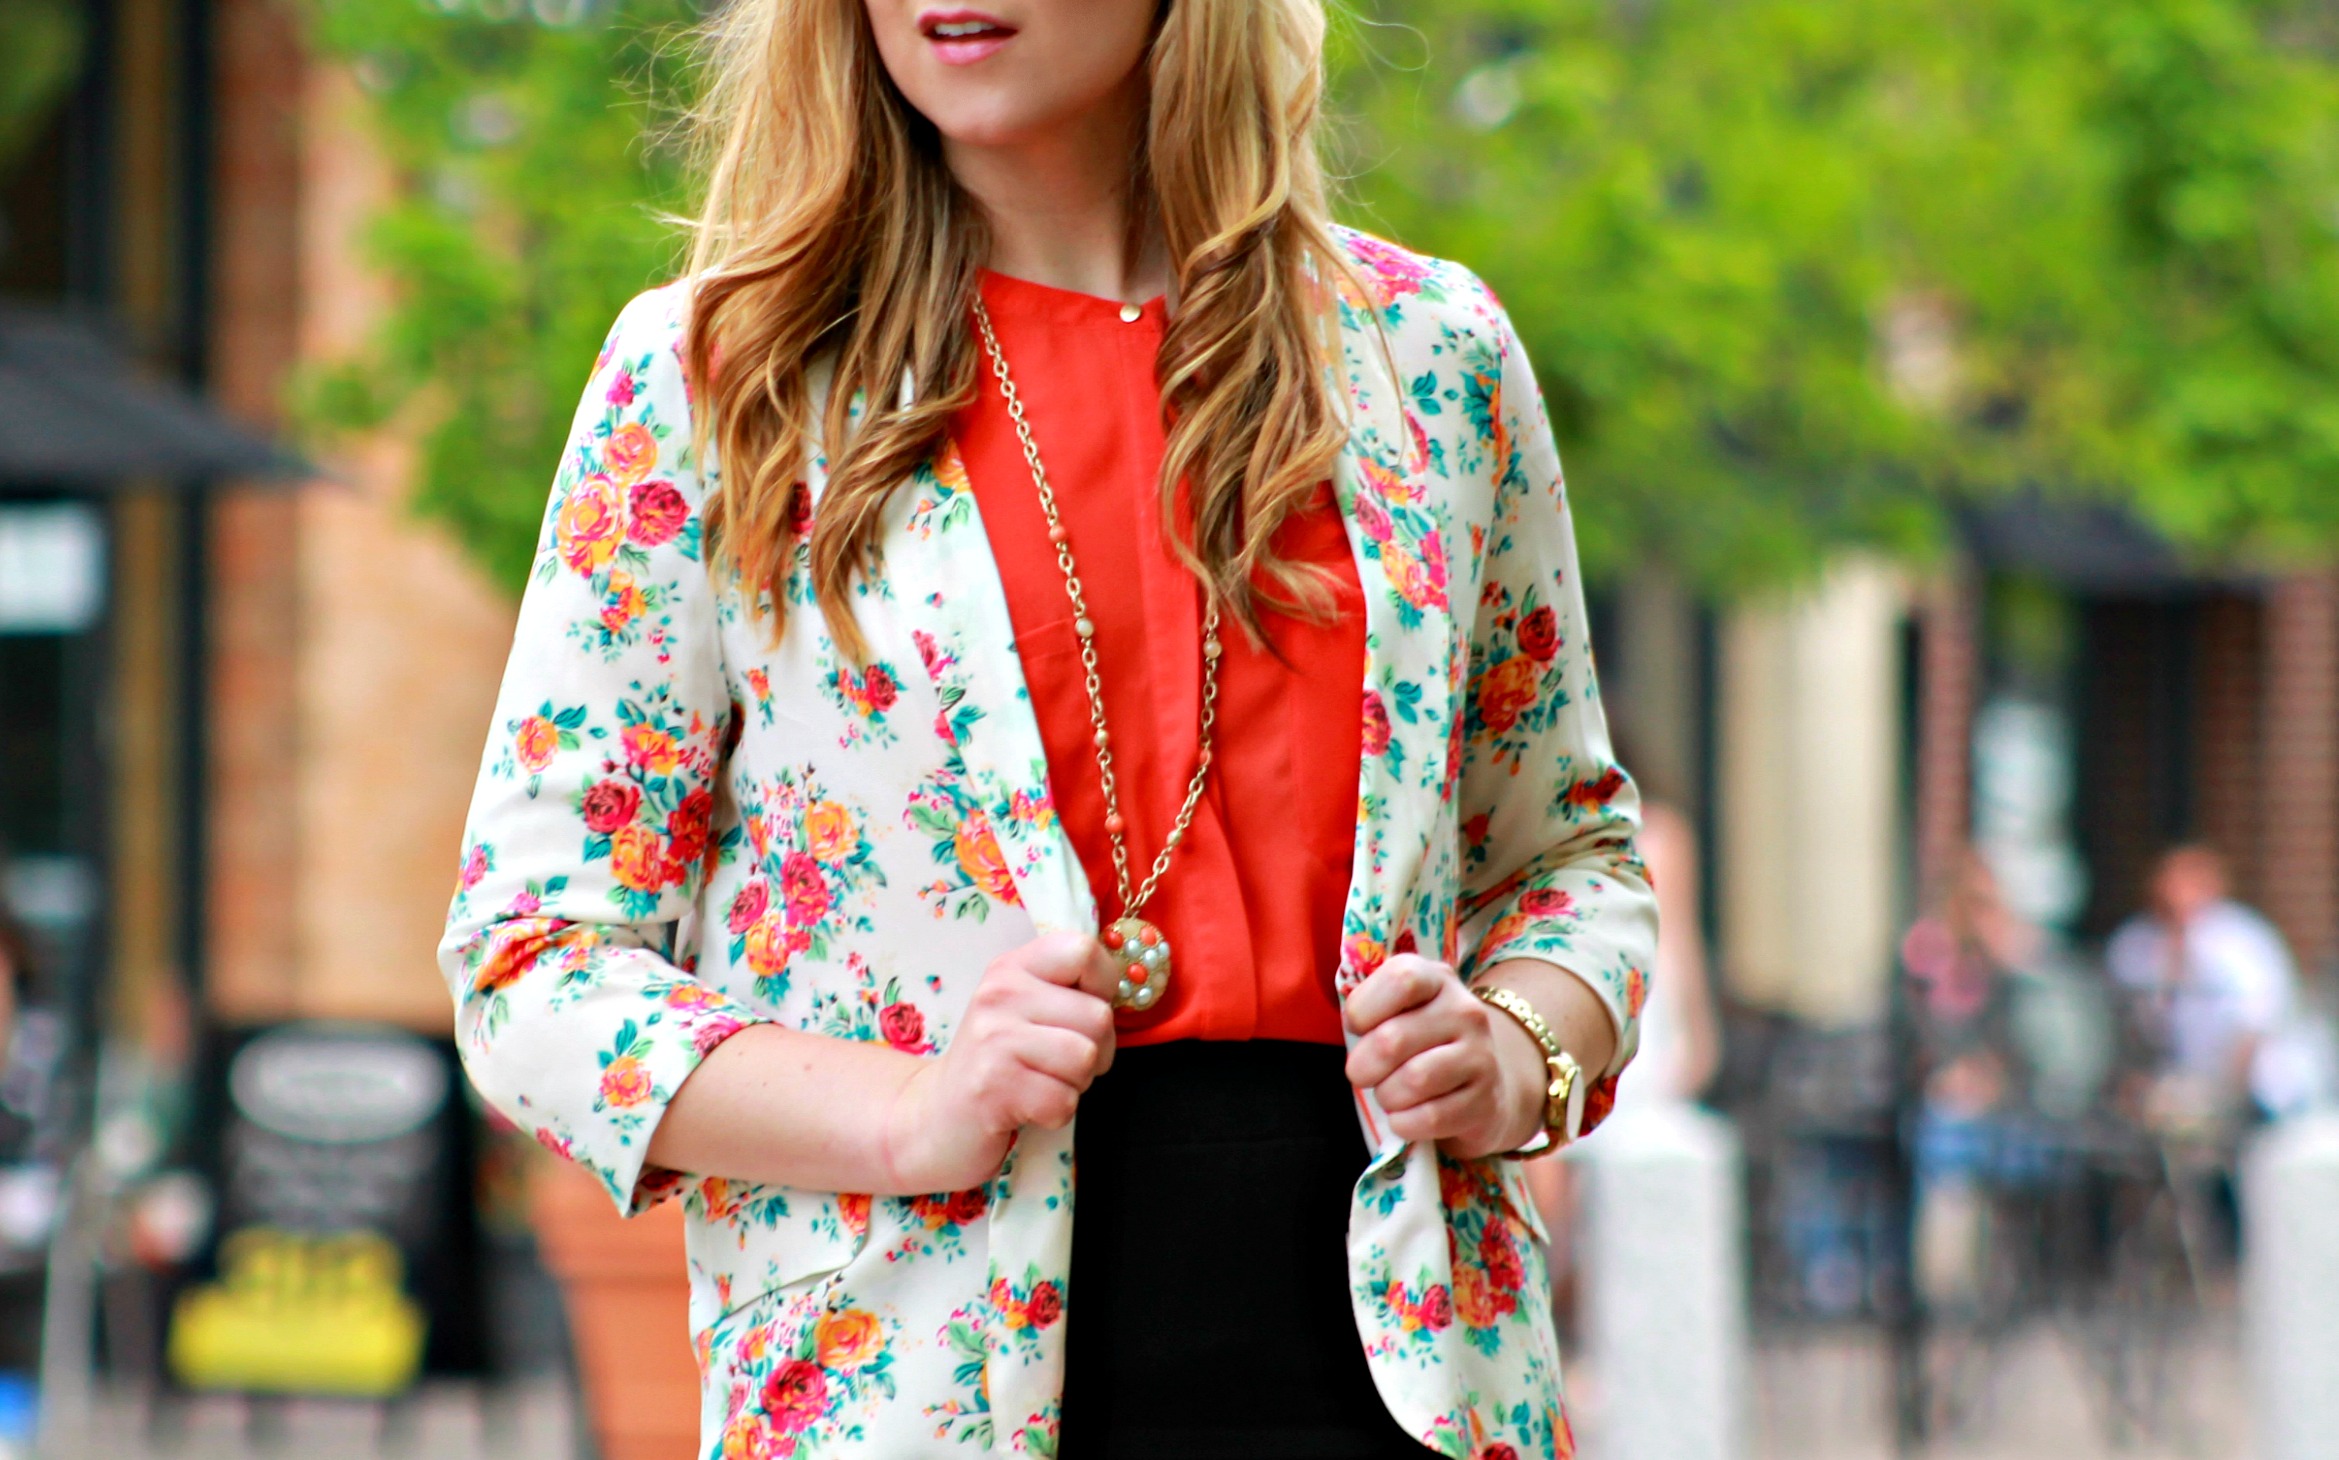 Floral Blazer + Long Gold Chain Necklace